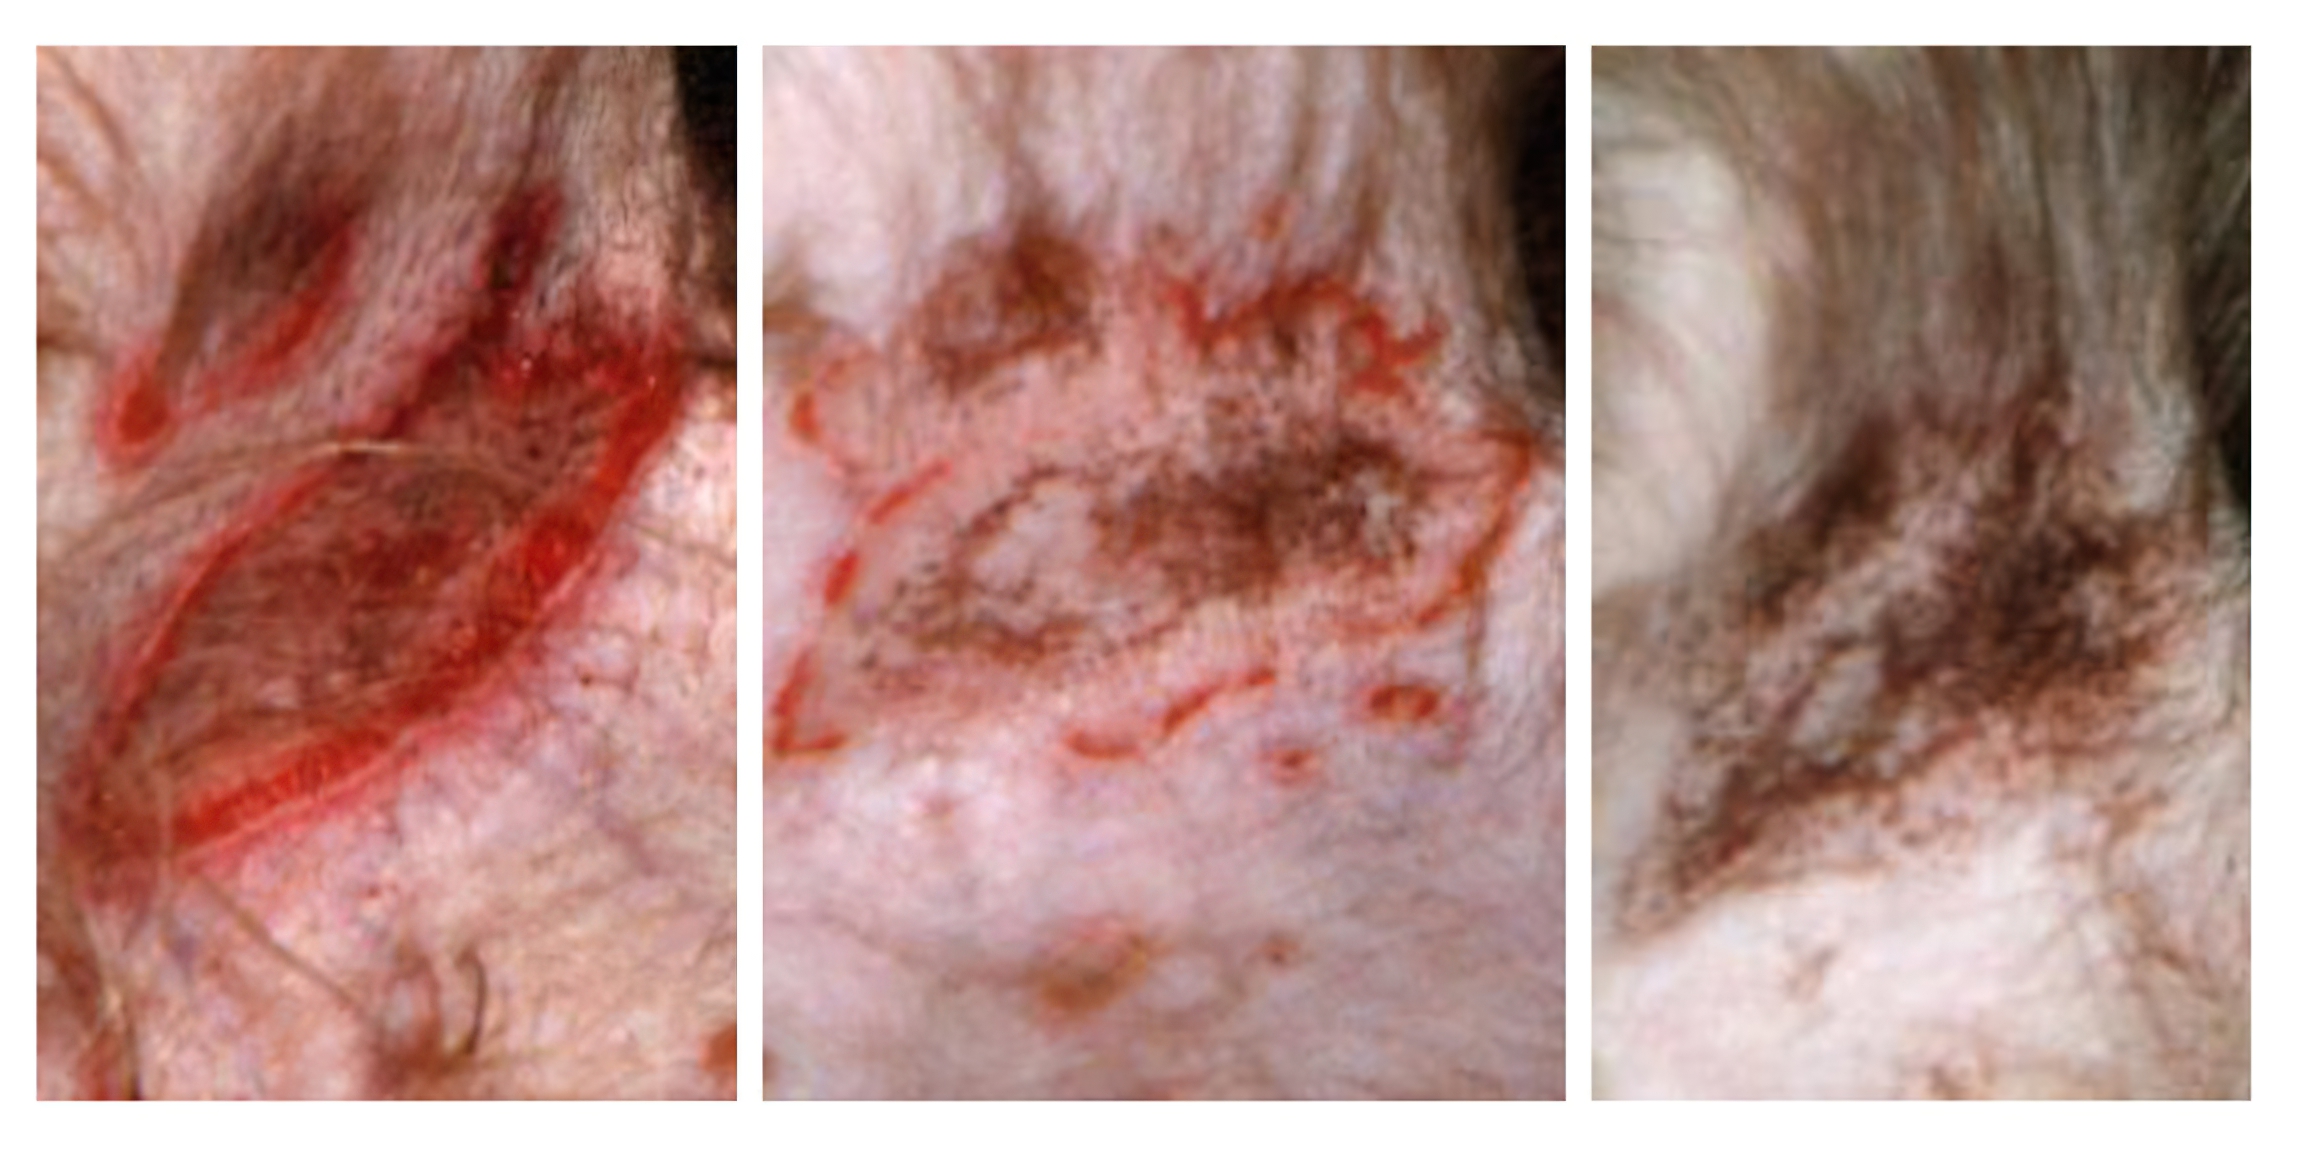 Rare Canine Vesicular Cutaneous Lupus Erythematosus in a previously unreported breed (1999), a Border Collie